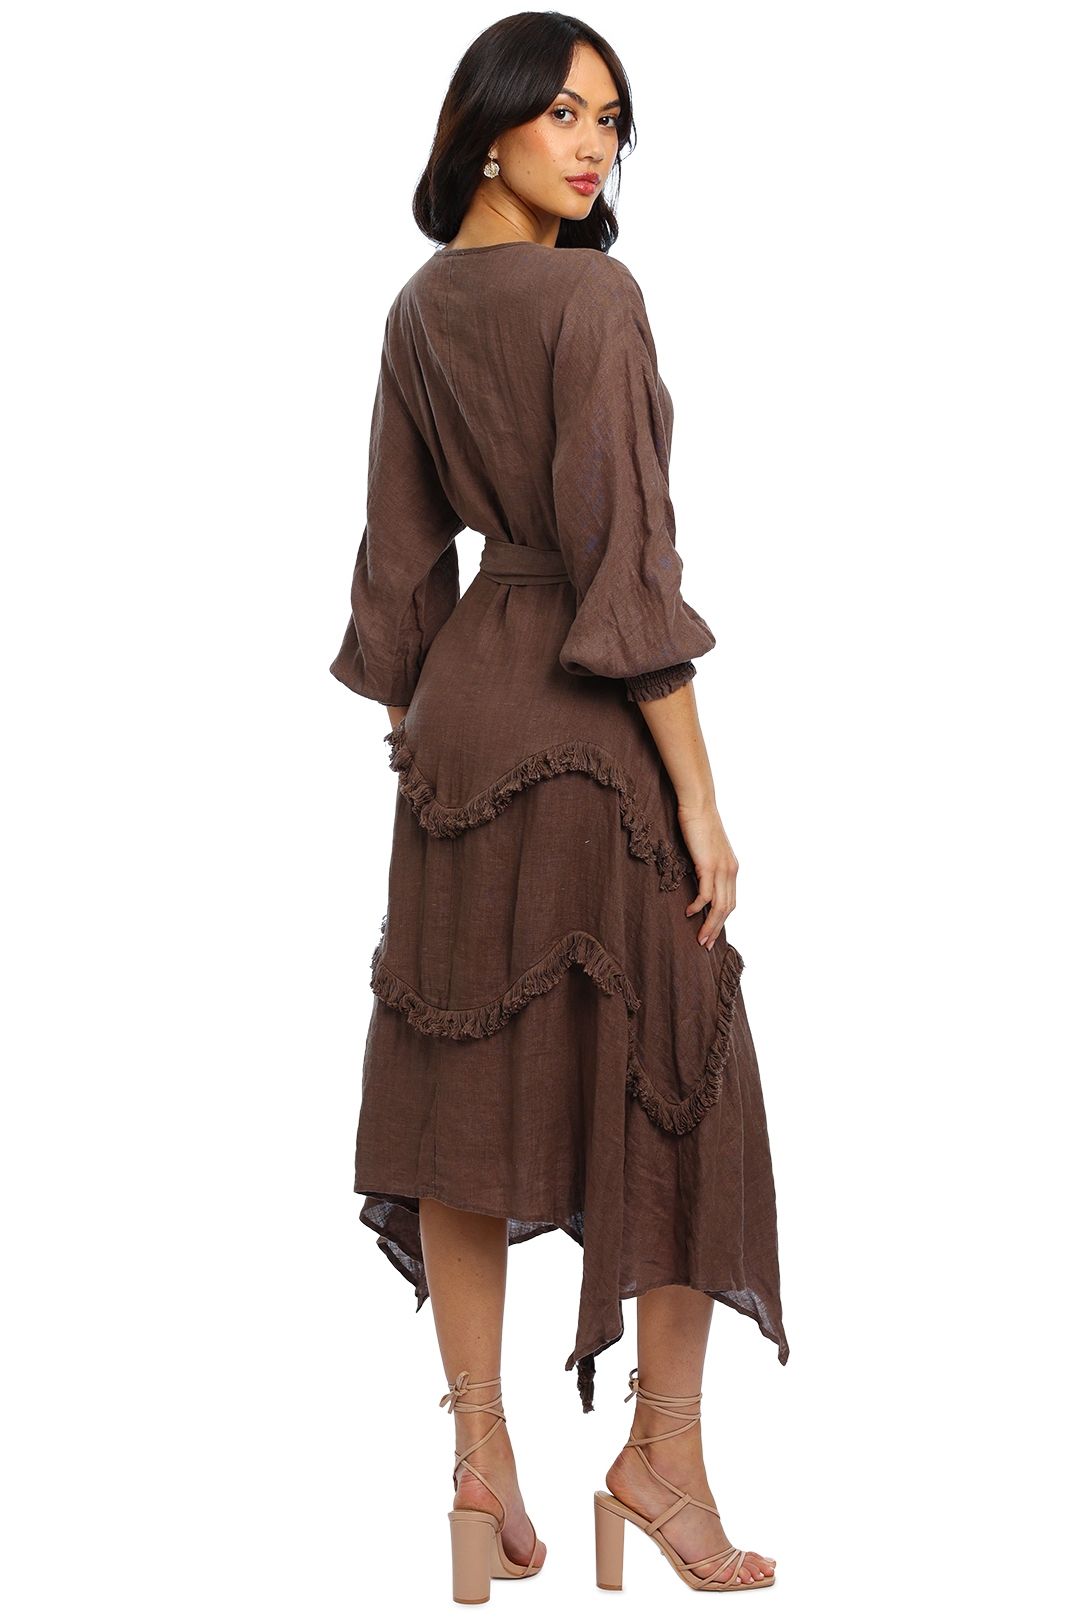 Ministry of Style Wilderness Maxi Dress asymmetric